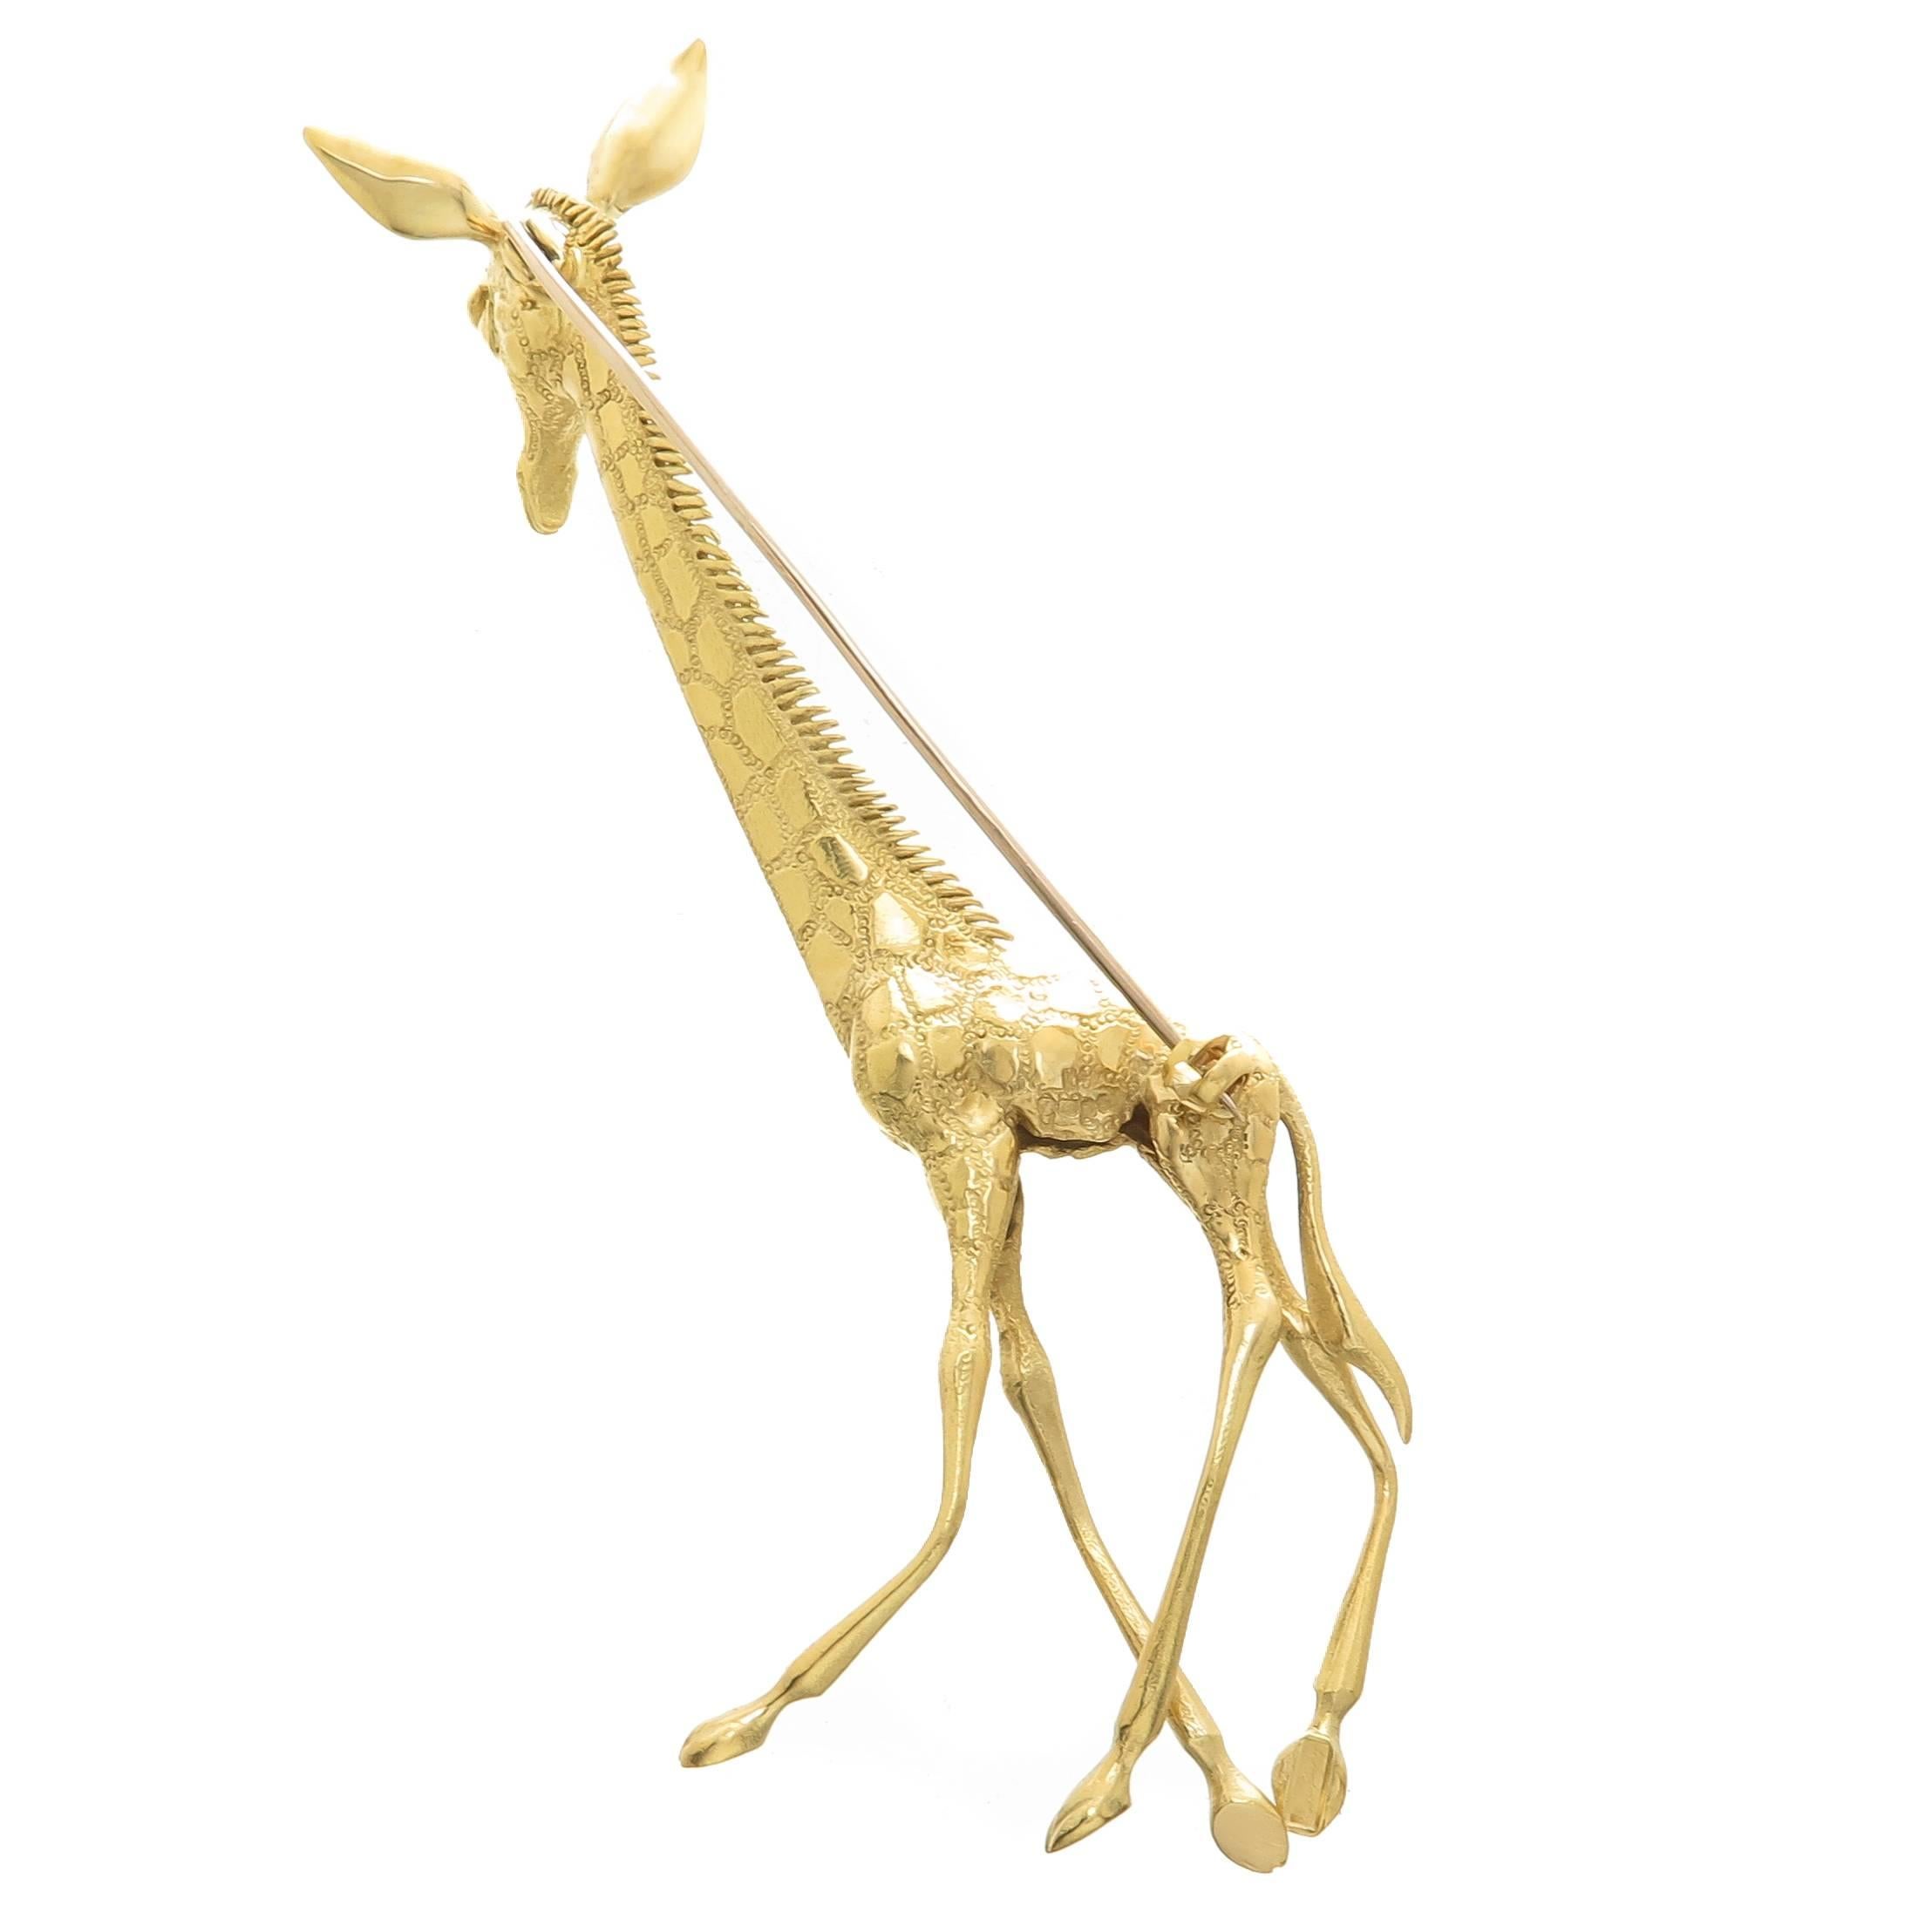 Circa 1980s Kutchinsky  18K Yellow Gold Giraffe Brooch, measuring 3 3/4 inch in height X 1 1/4 inch wide and weighs 34.6 Grams.  This piece is 3 dimensional and is incredibly well detailed and finished, a very fine piece of jewelry craftsmanship. 